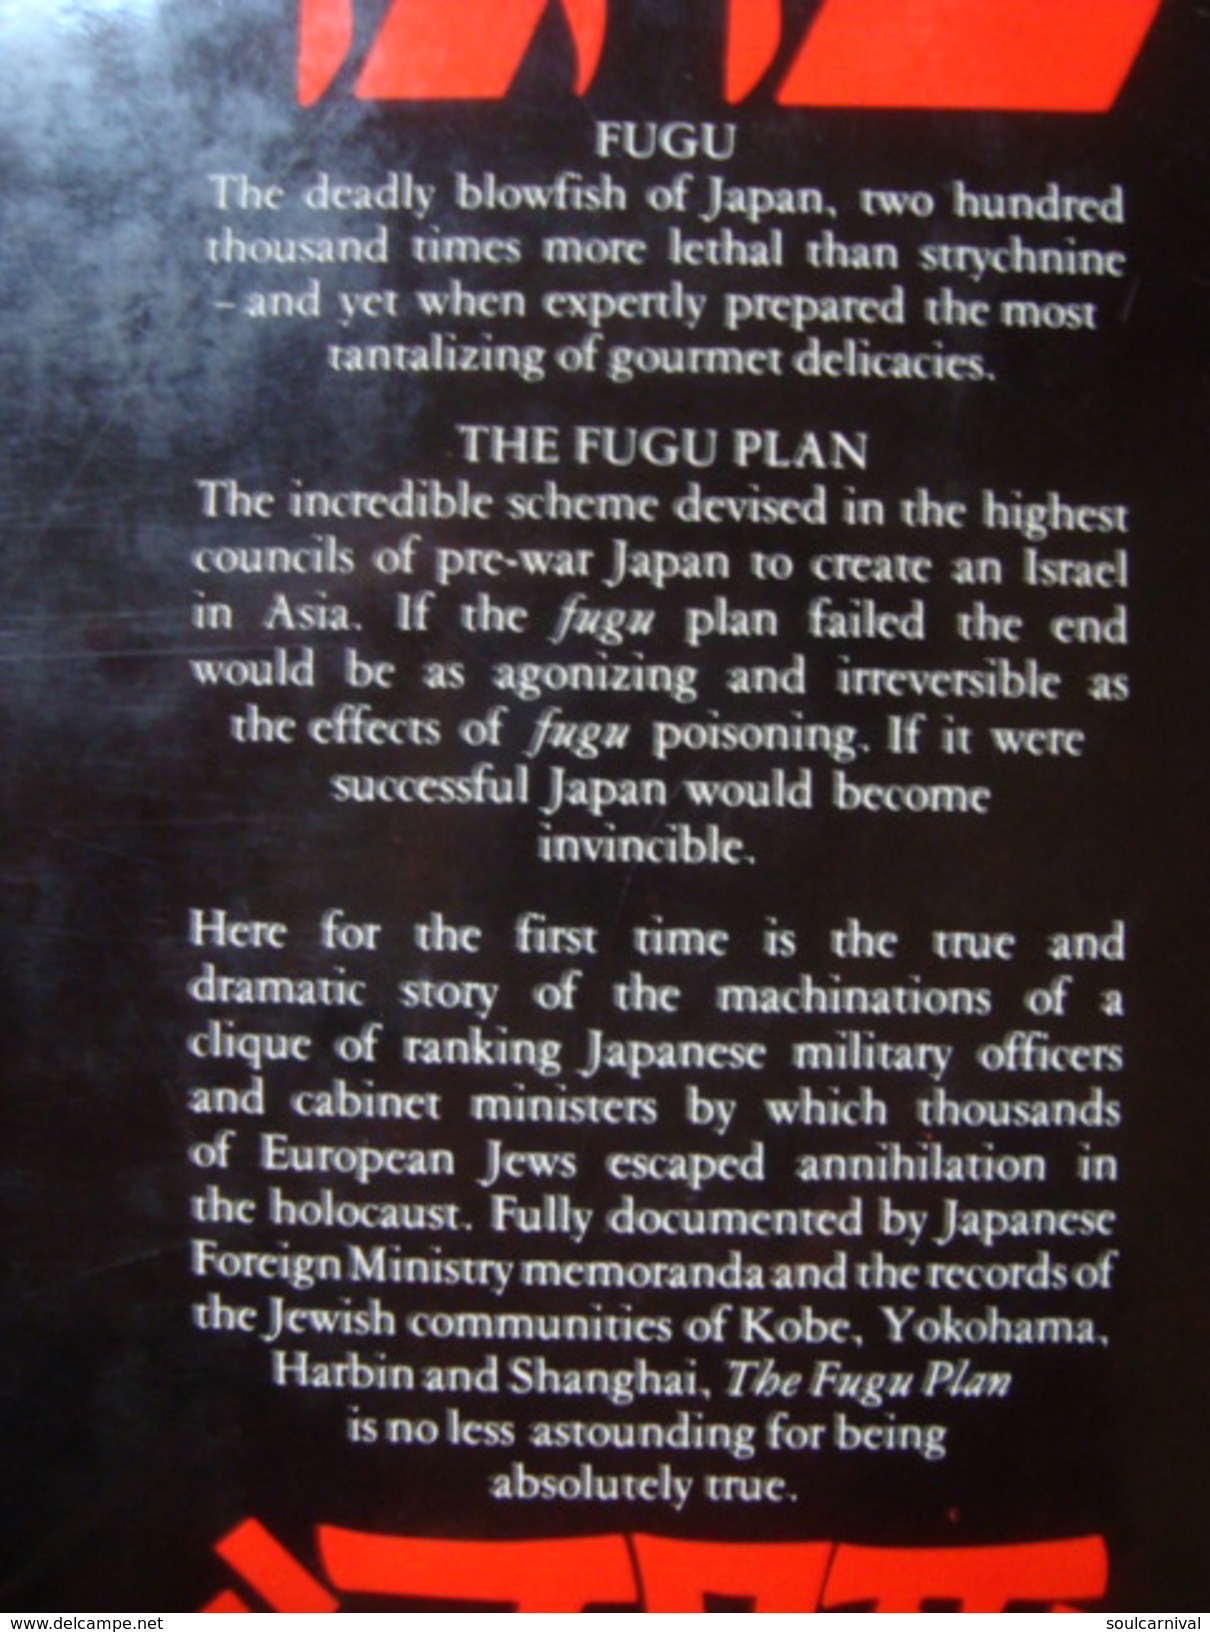 THE FUGU PLAN. THE UNTOLD STORY OF THE JAPANESE AND THE JEWS DURING WORLD WAR II - TOKAYER SWARTZ (1979). WWII - Asia